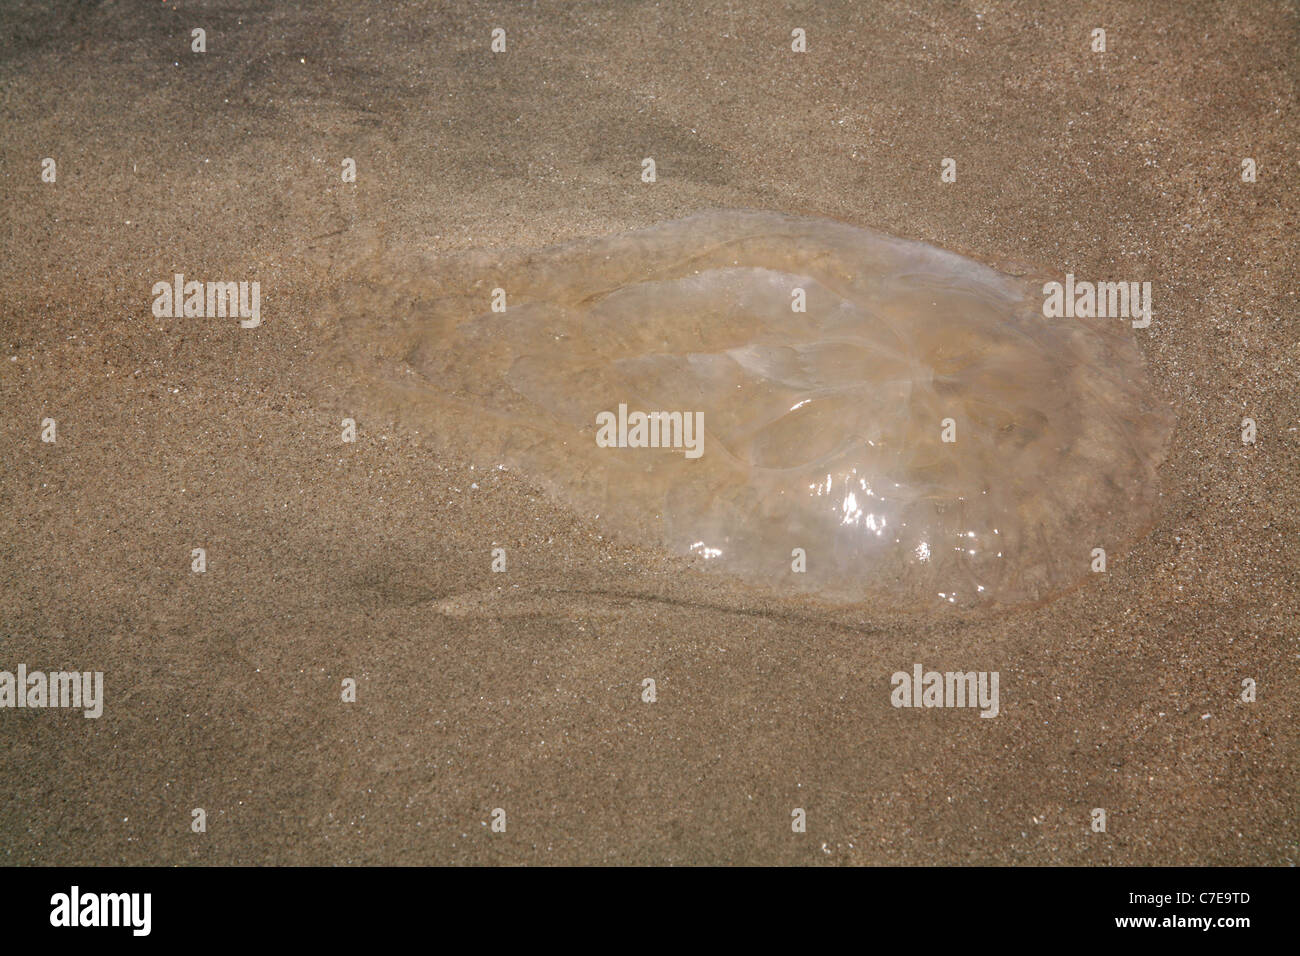 Low tide in an empty beach left a jelly fish in the sand. Stock Photo